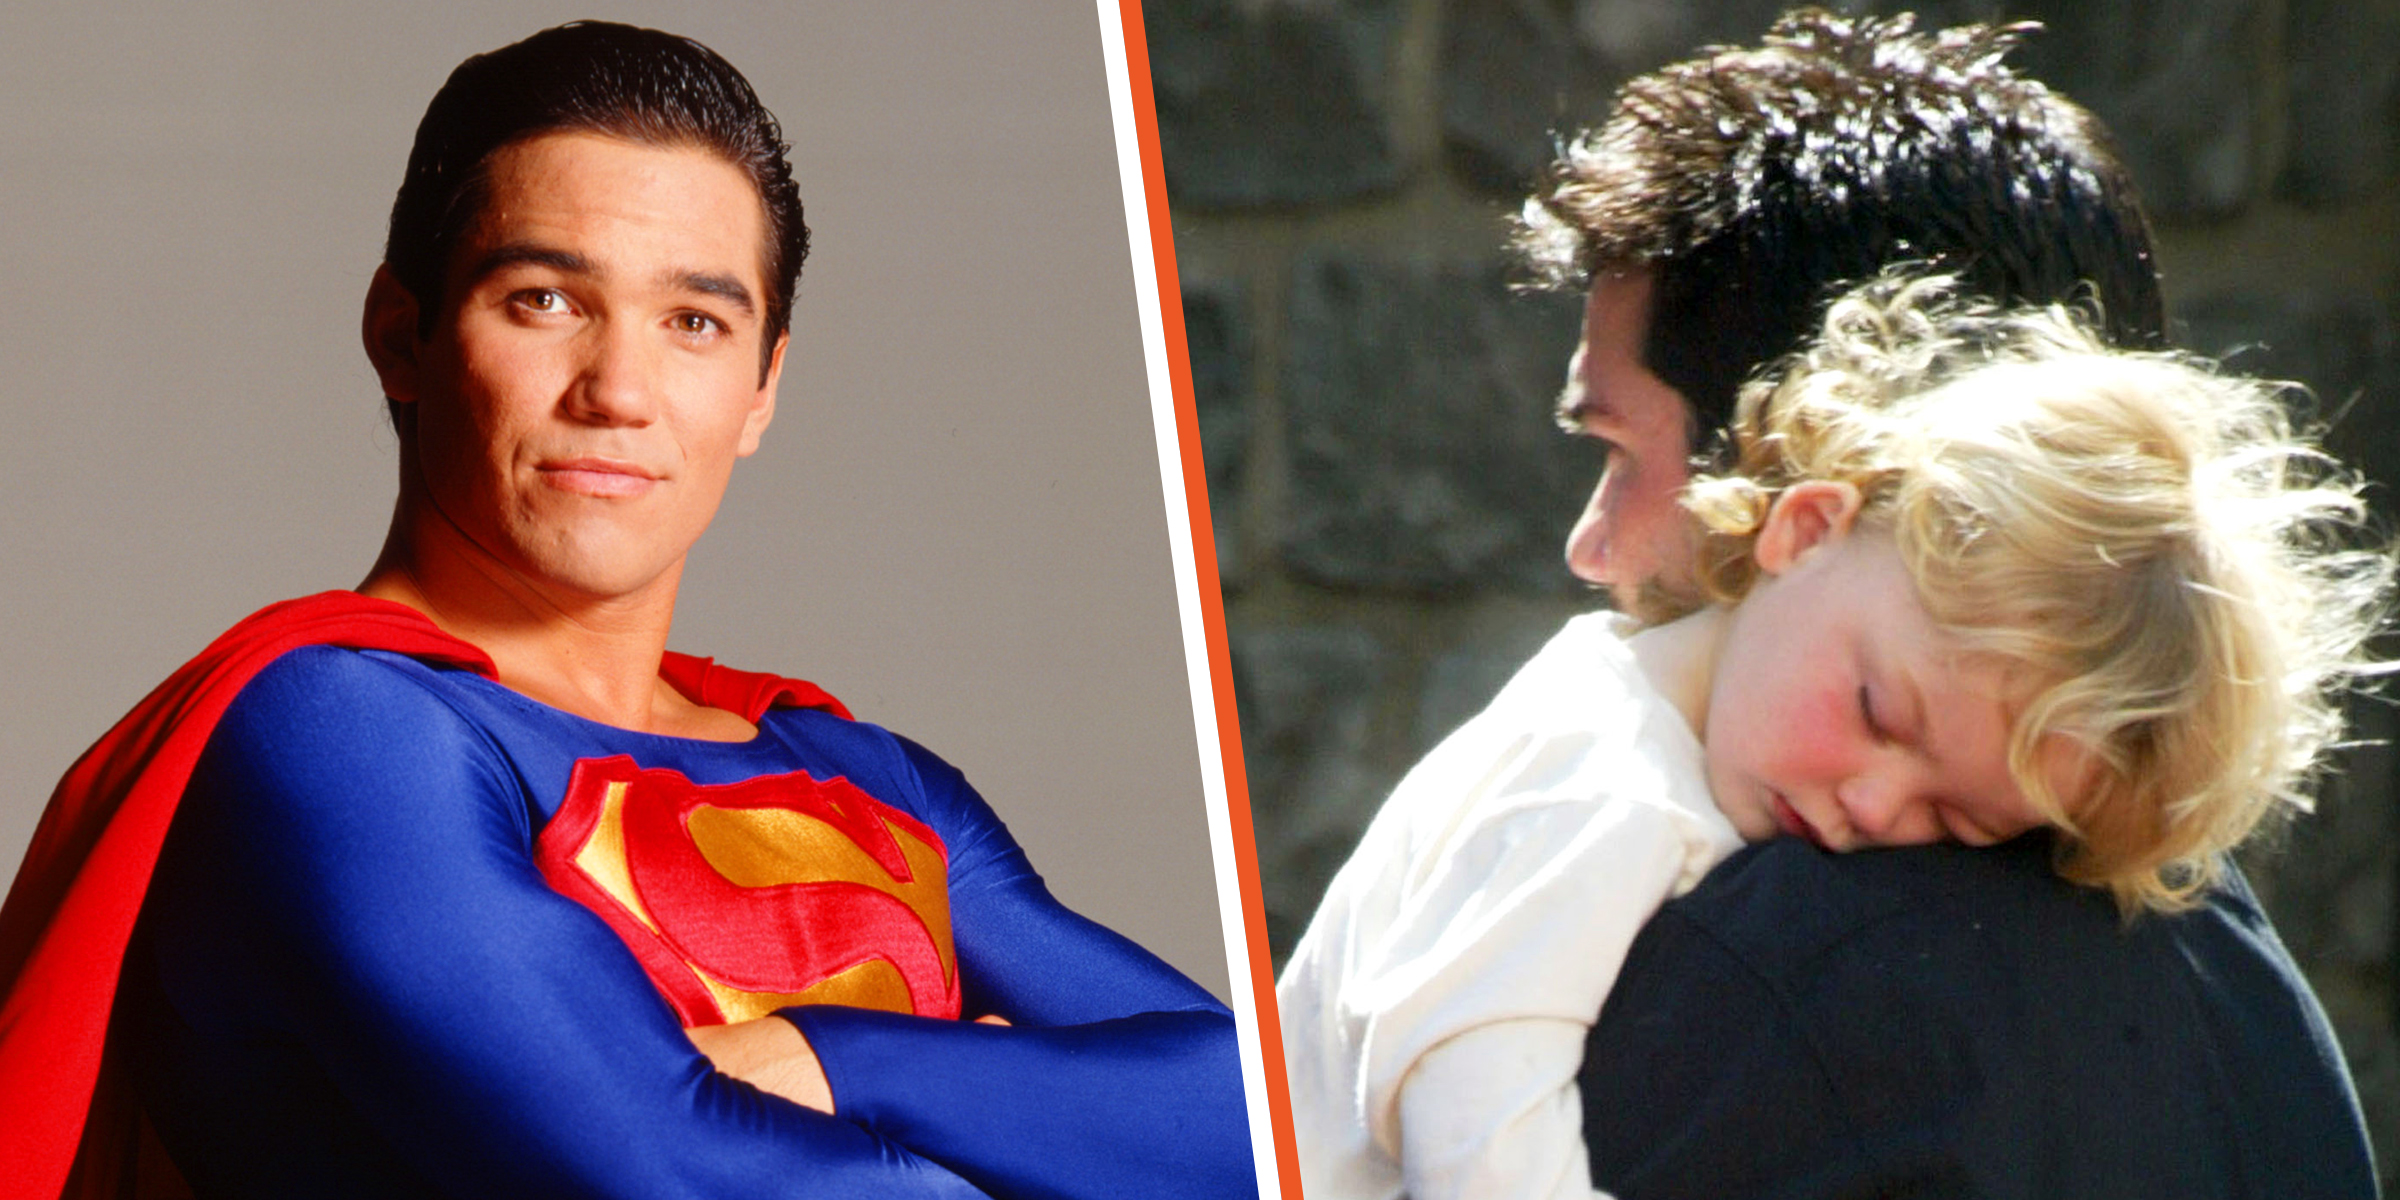 Dean Cain, 1995 | Dean Cain and Christopher Cain, 2002 | Source: Getty Images